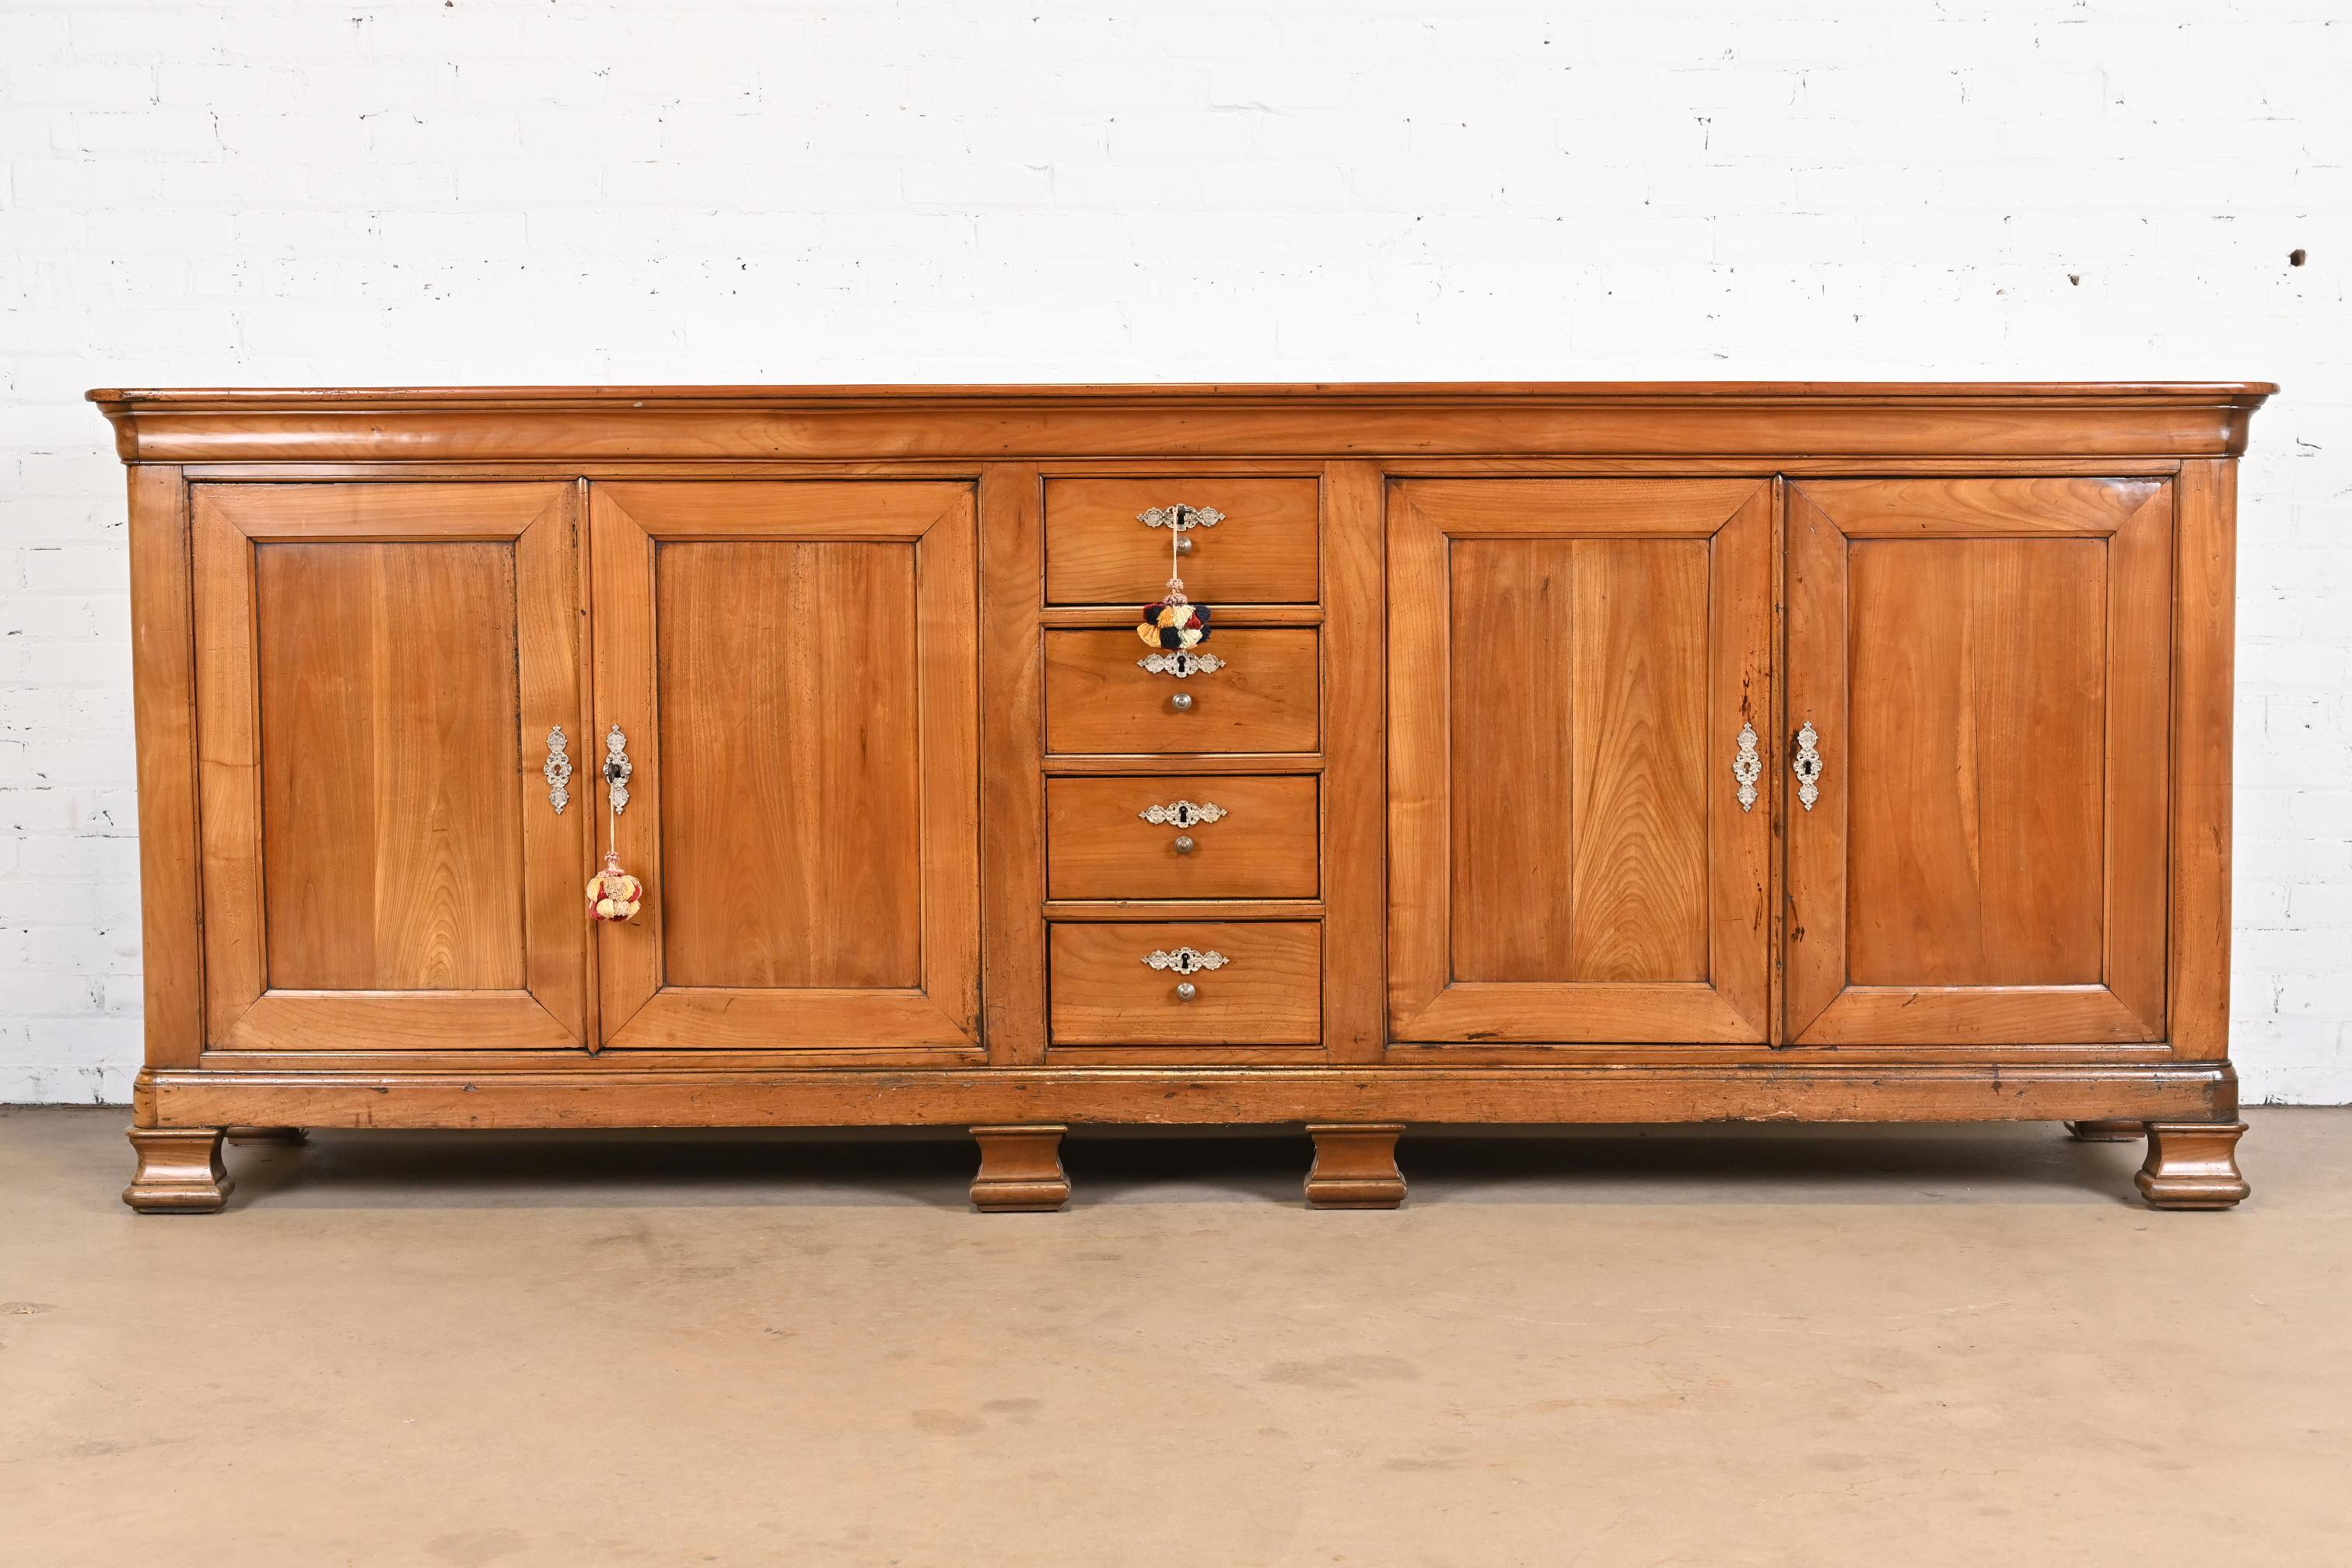 19th Century Antique Monumental French Provincial Walnut Sideboard or Bar Cabinet